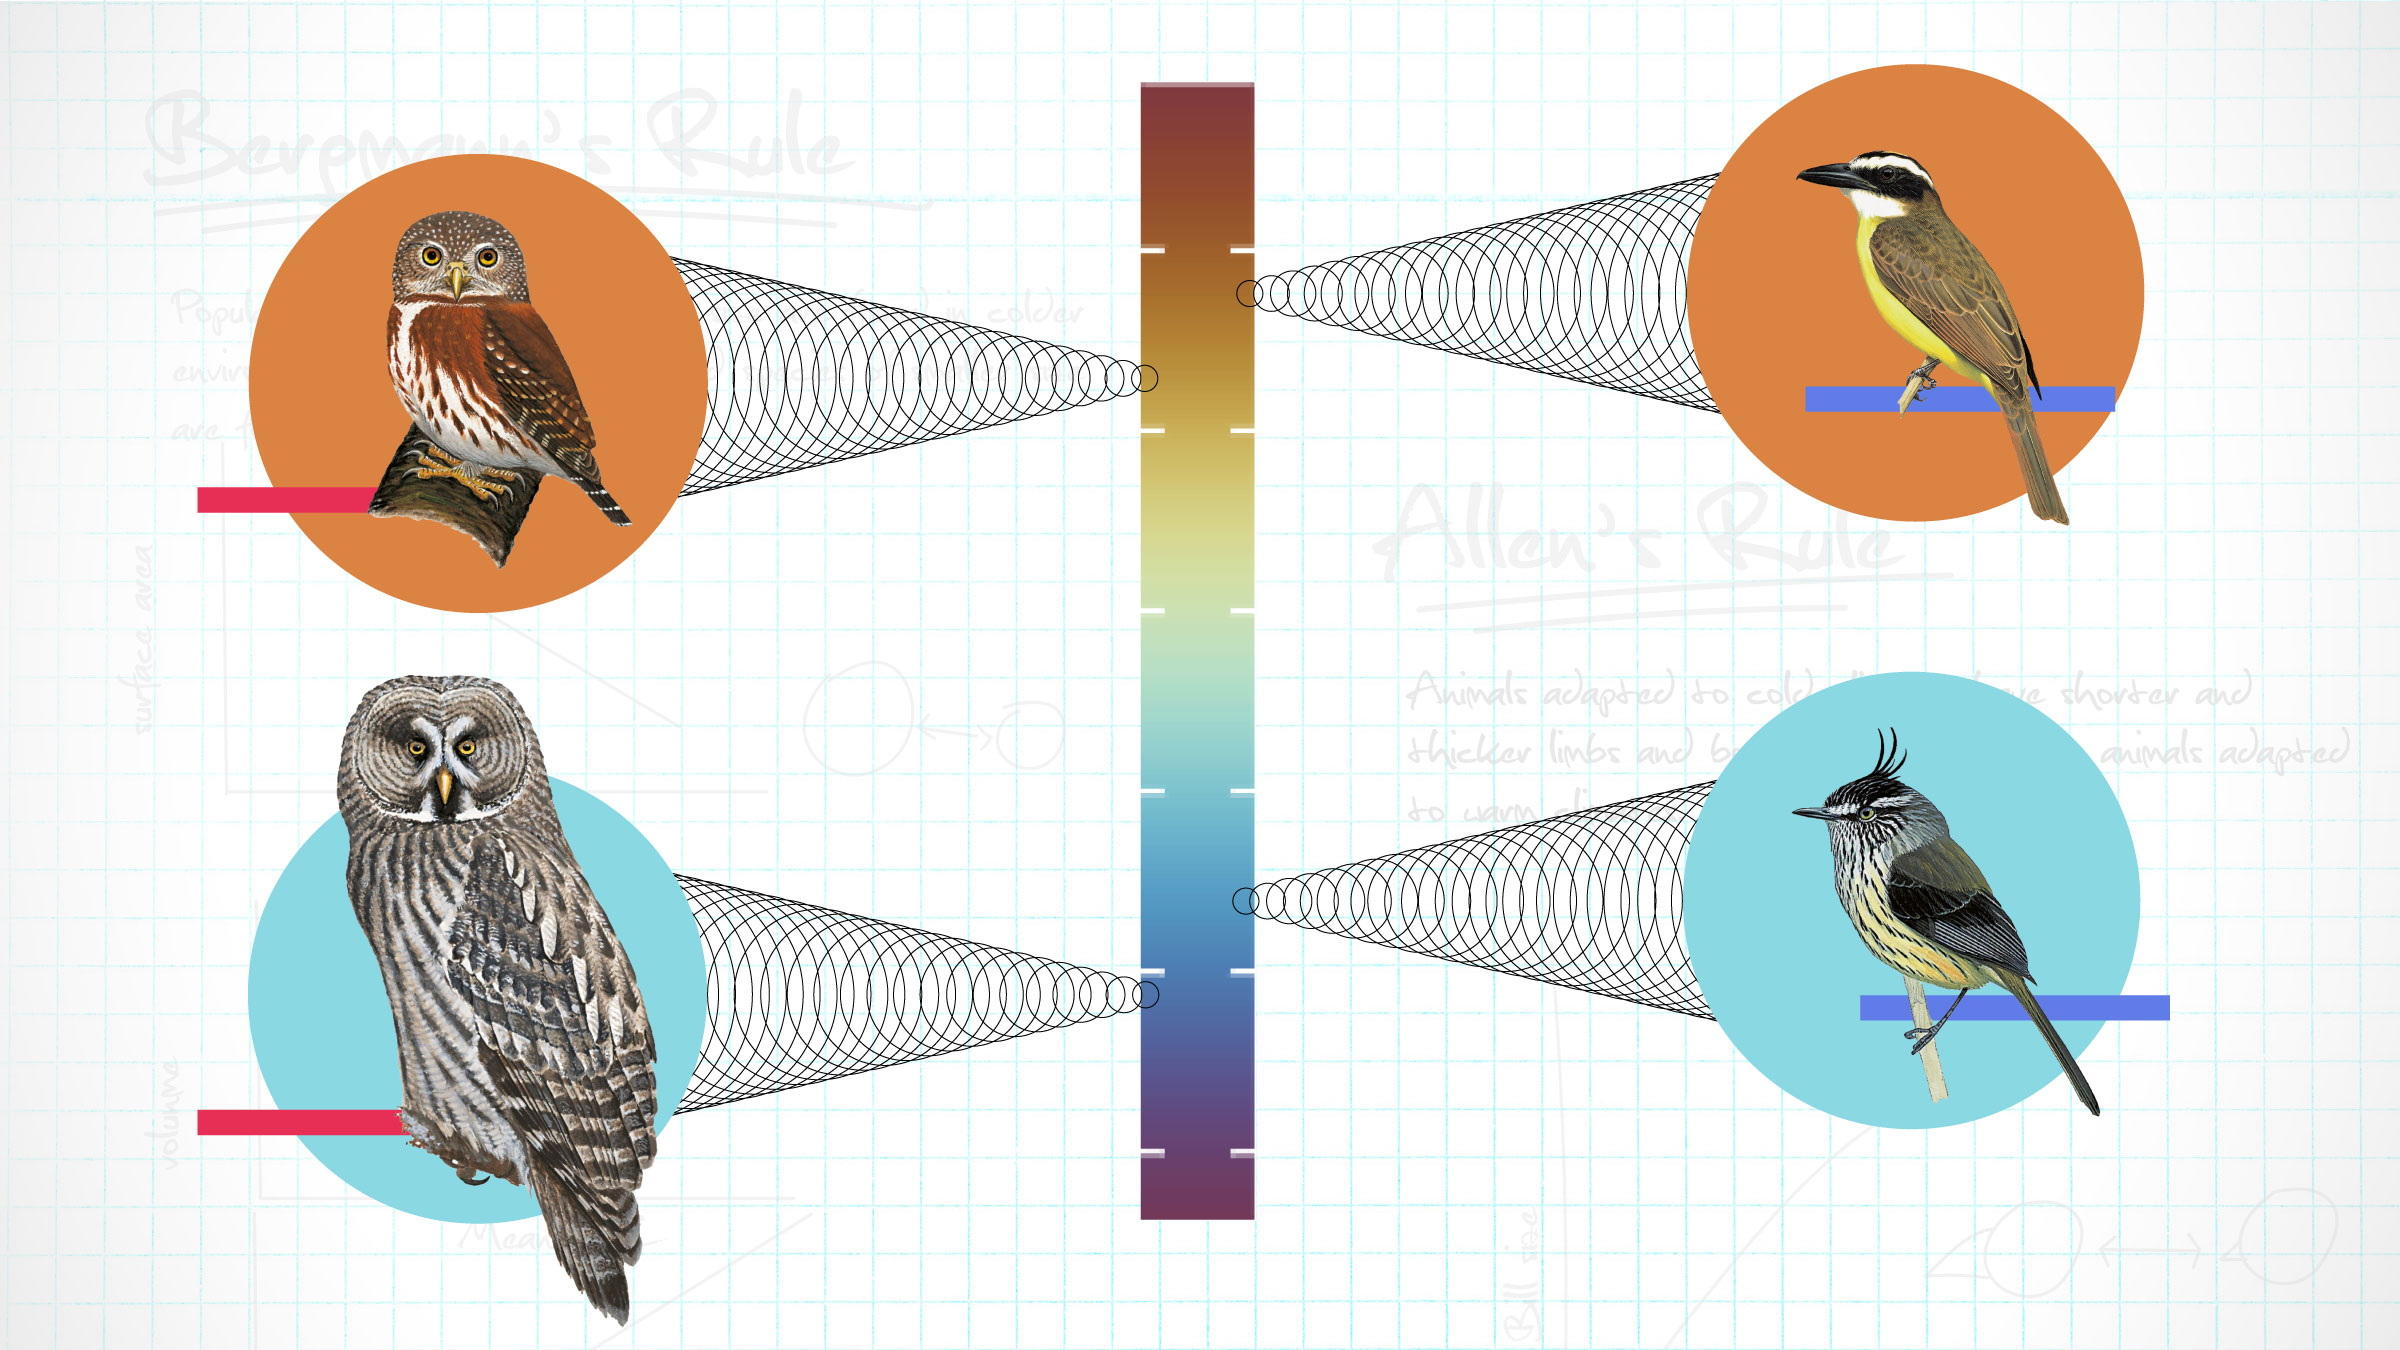 Image showing bird species and where they fall on the temperature gradient